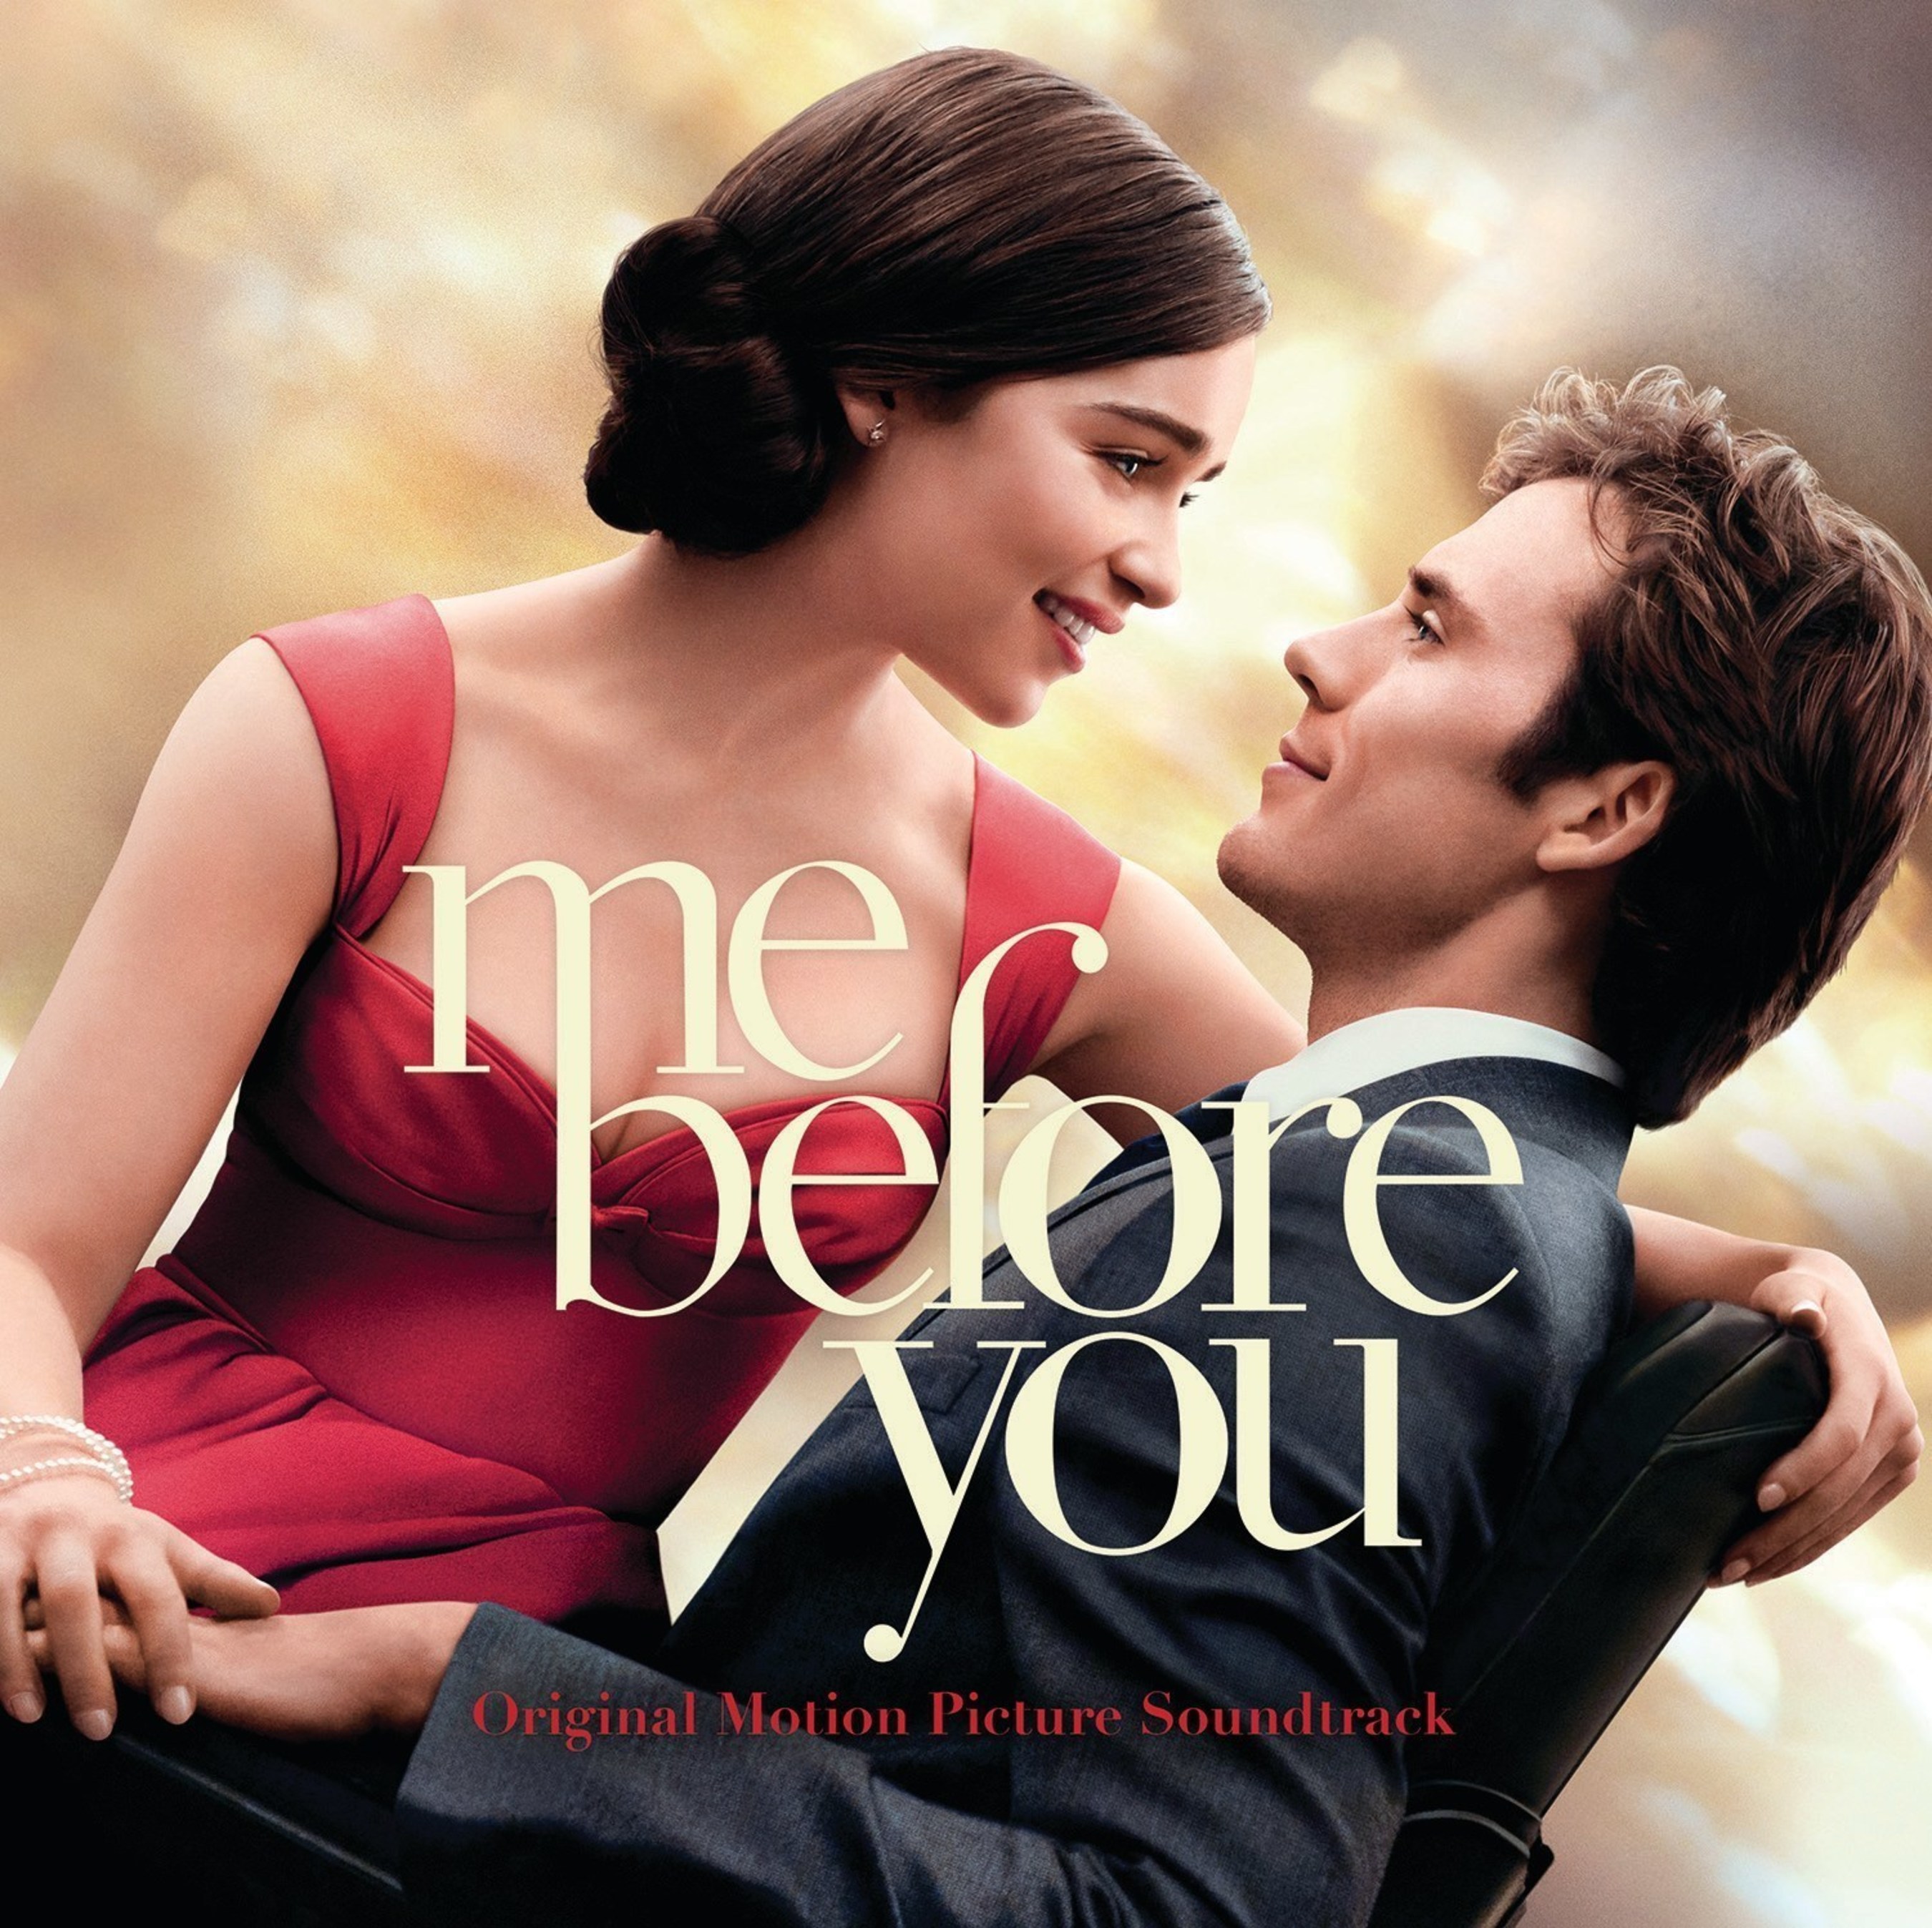 Interscope Records to Release Official Soundtrack to Upcoming Film Me Before You on June 3rd